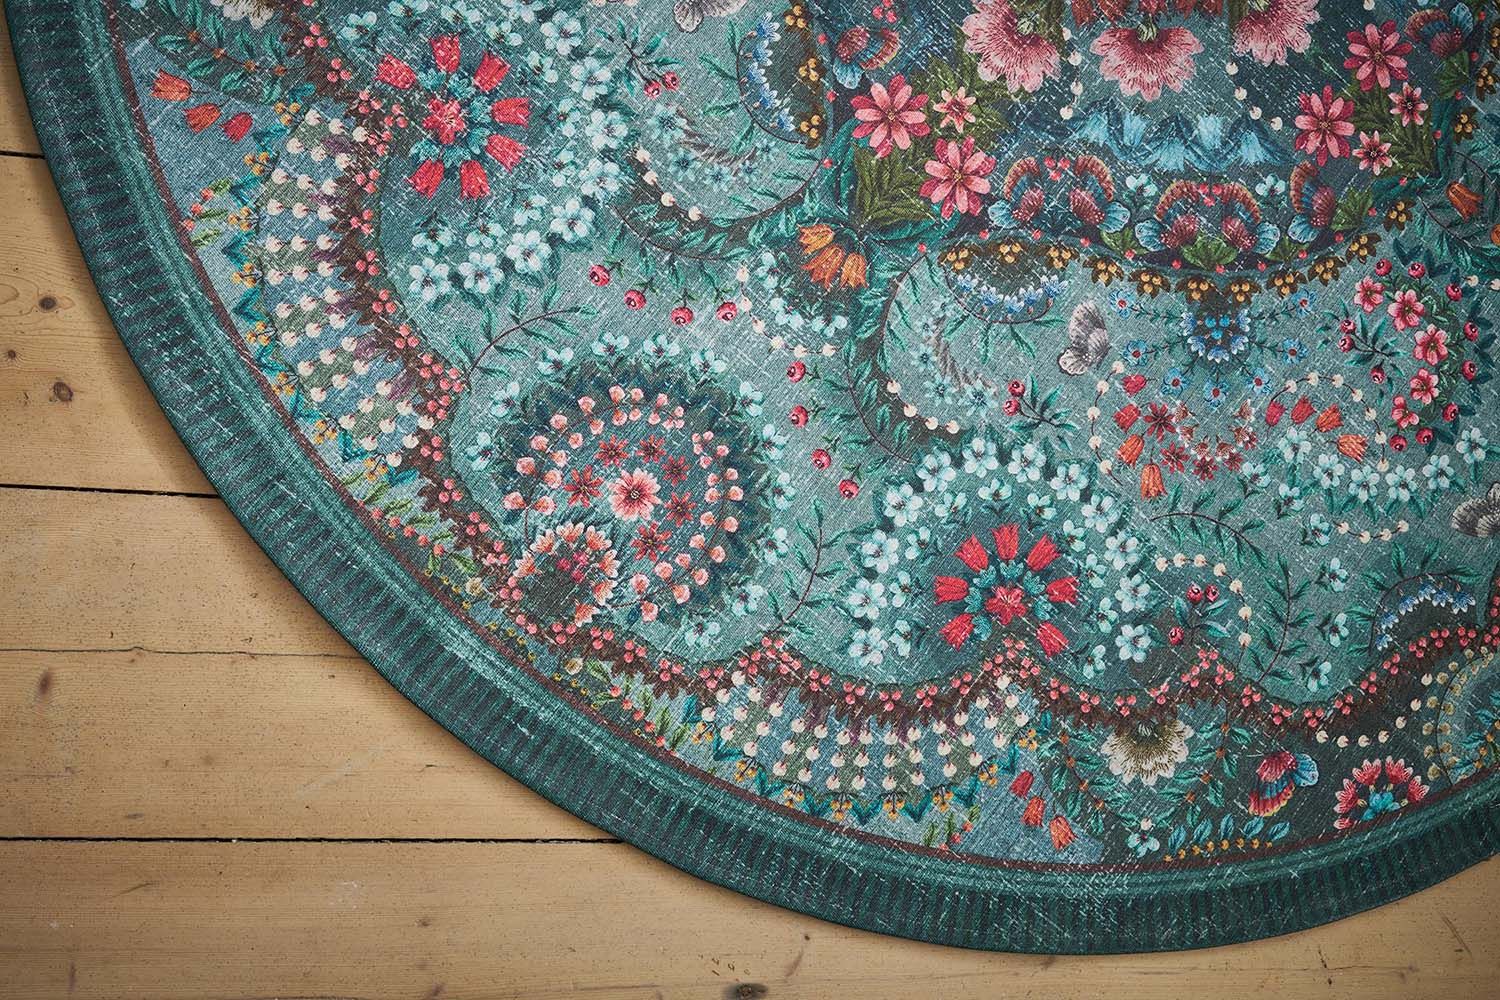 Round Carpet Moon Delight by Pip Green